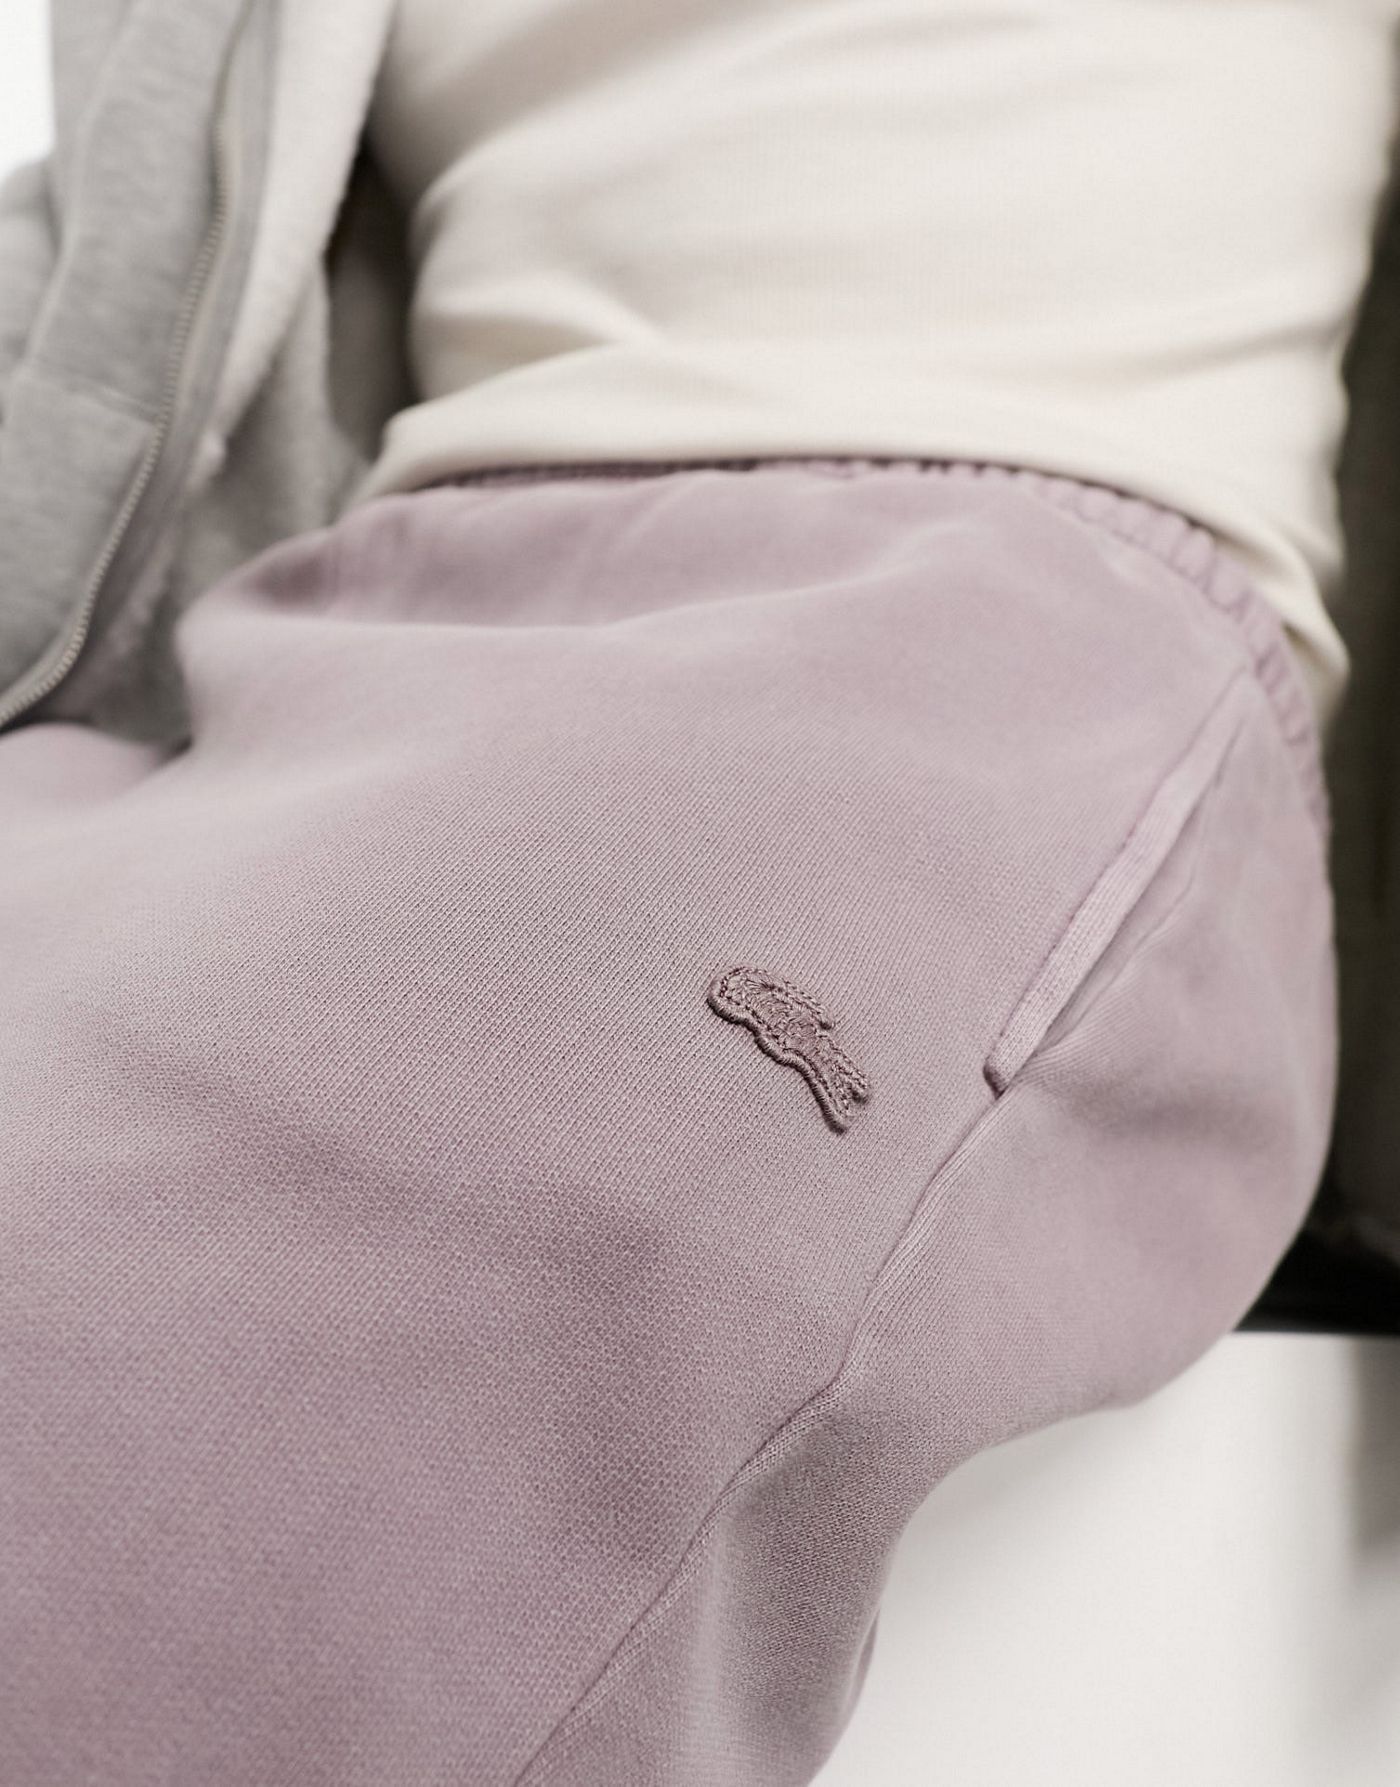 Lacoste premium joggers in washed purple